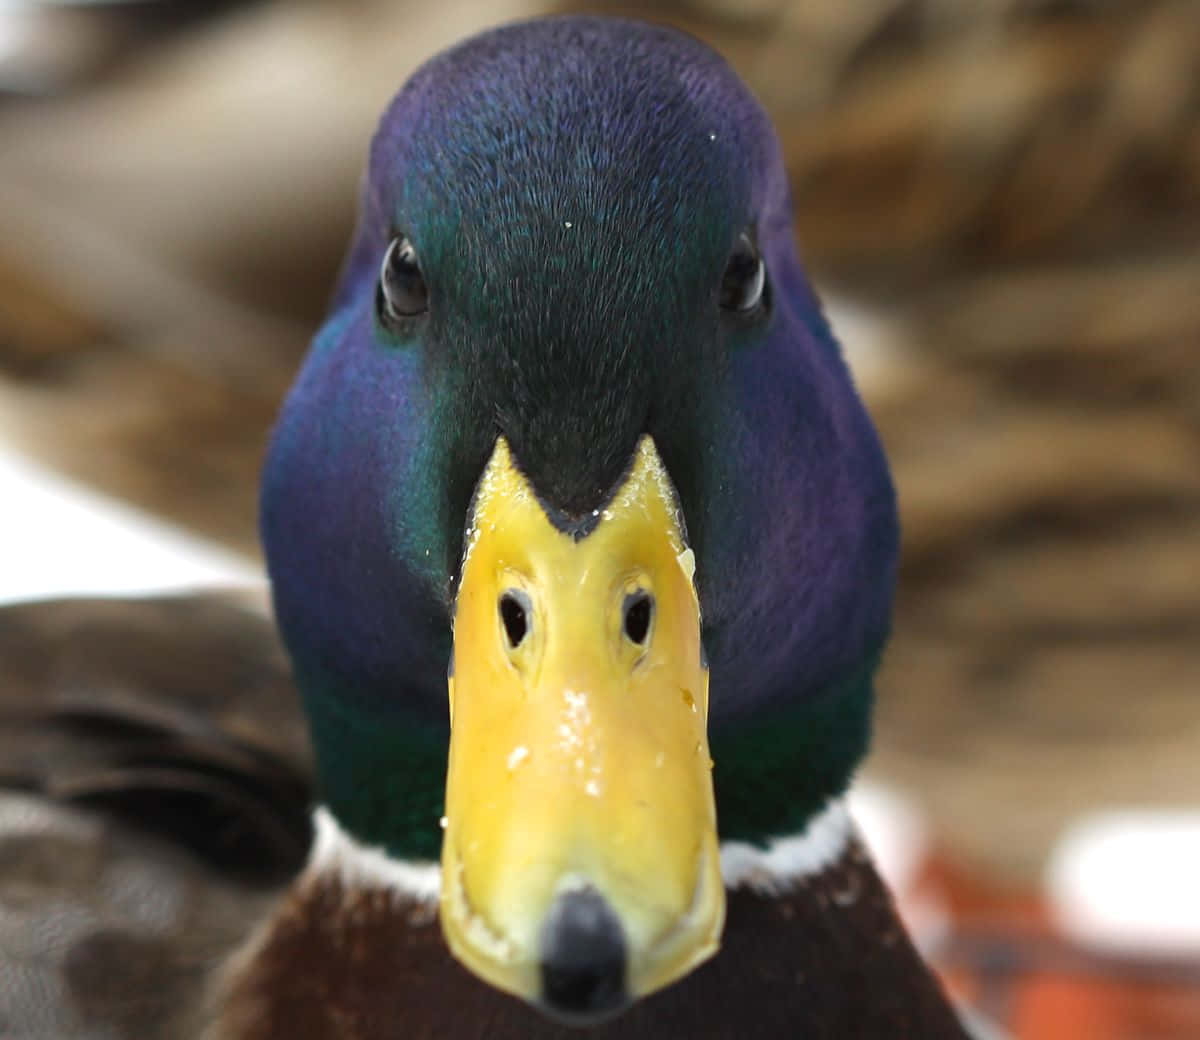 A Close Up Of A Duck With A Purple Beak